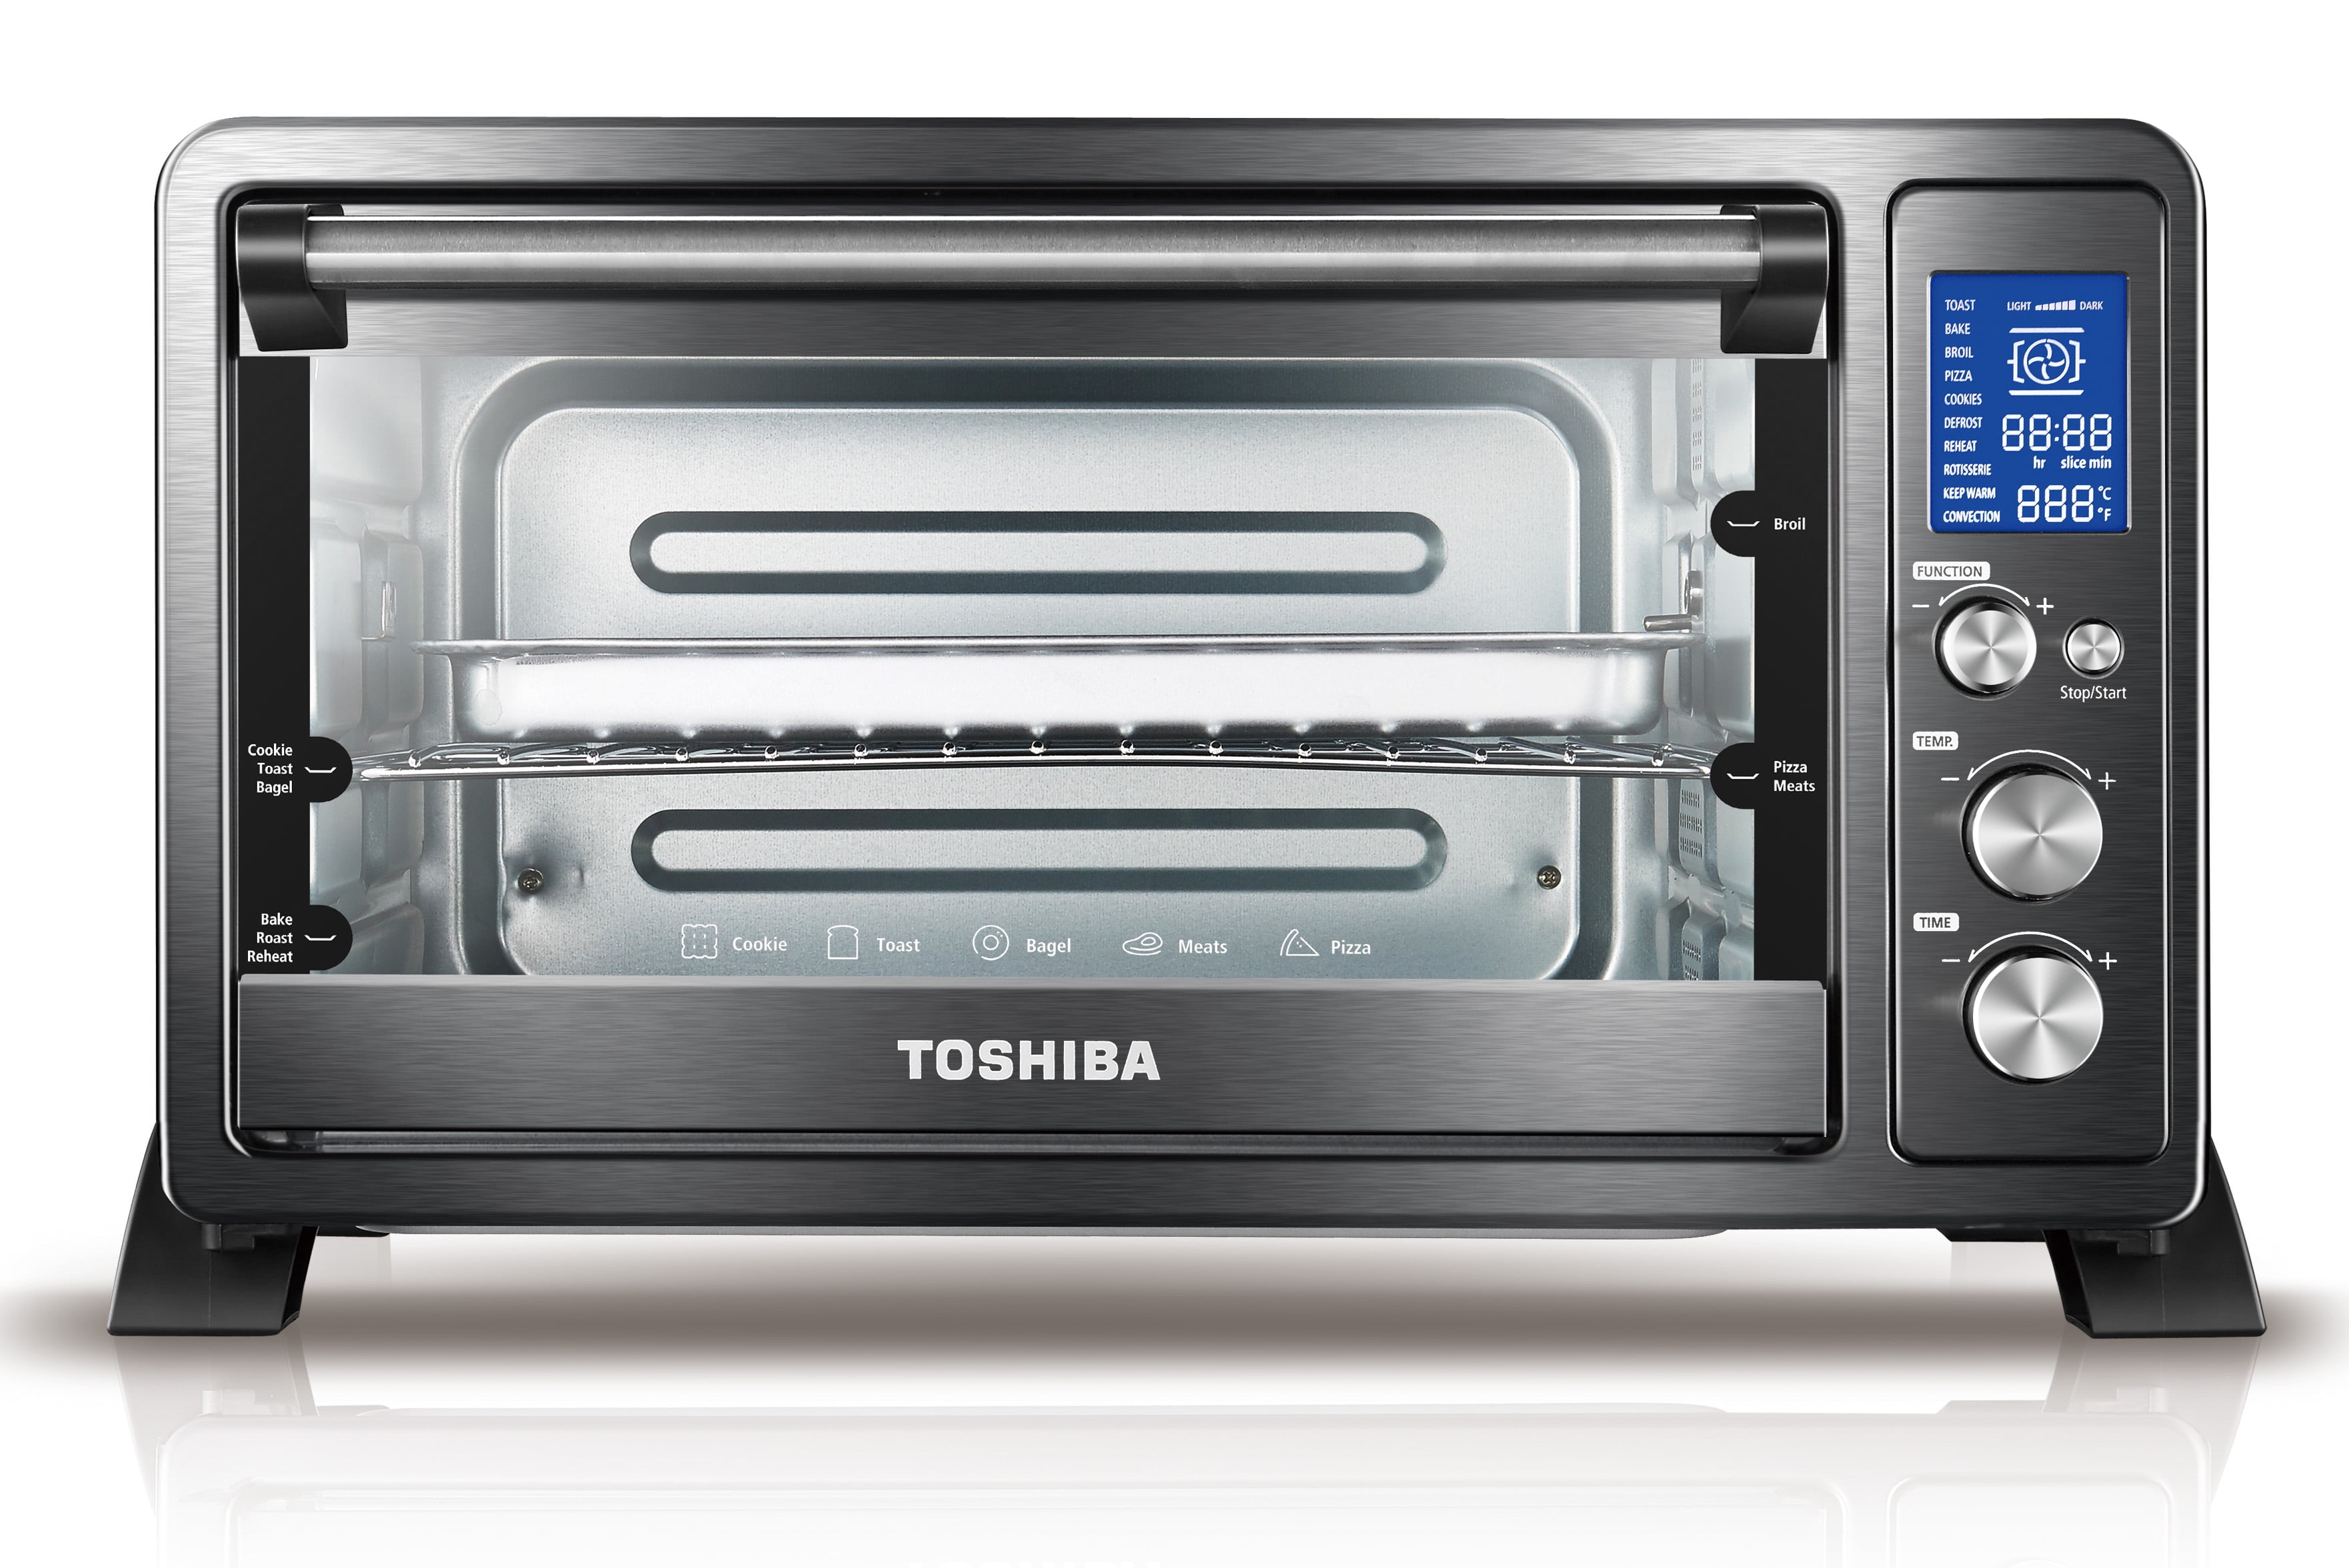 Toshiba's digital toaster oven is on sale for just $87.99 at